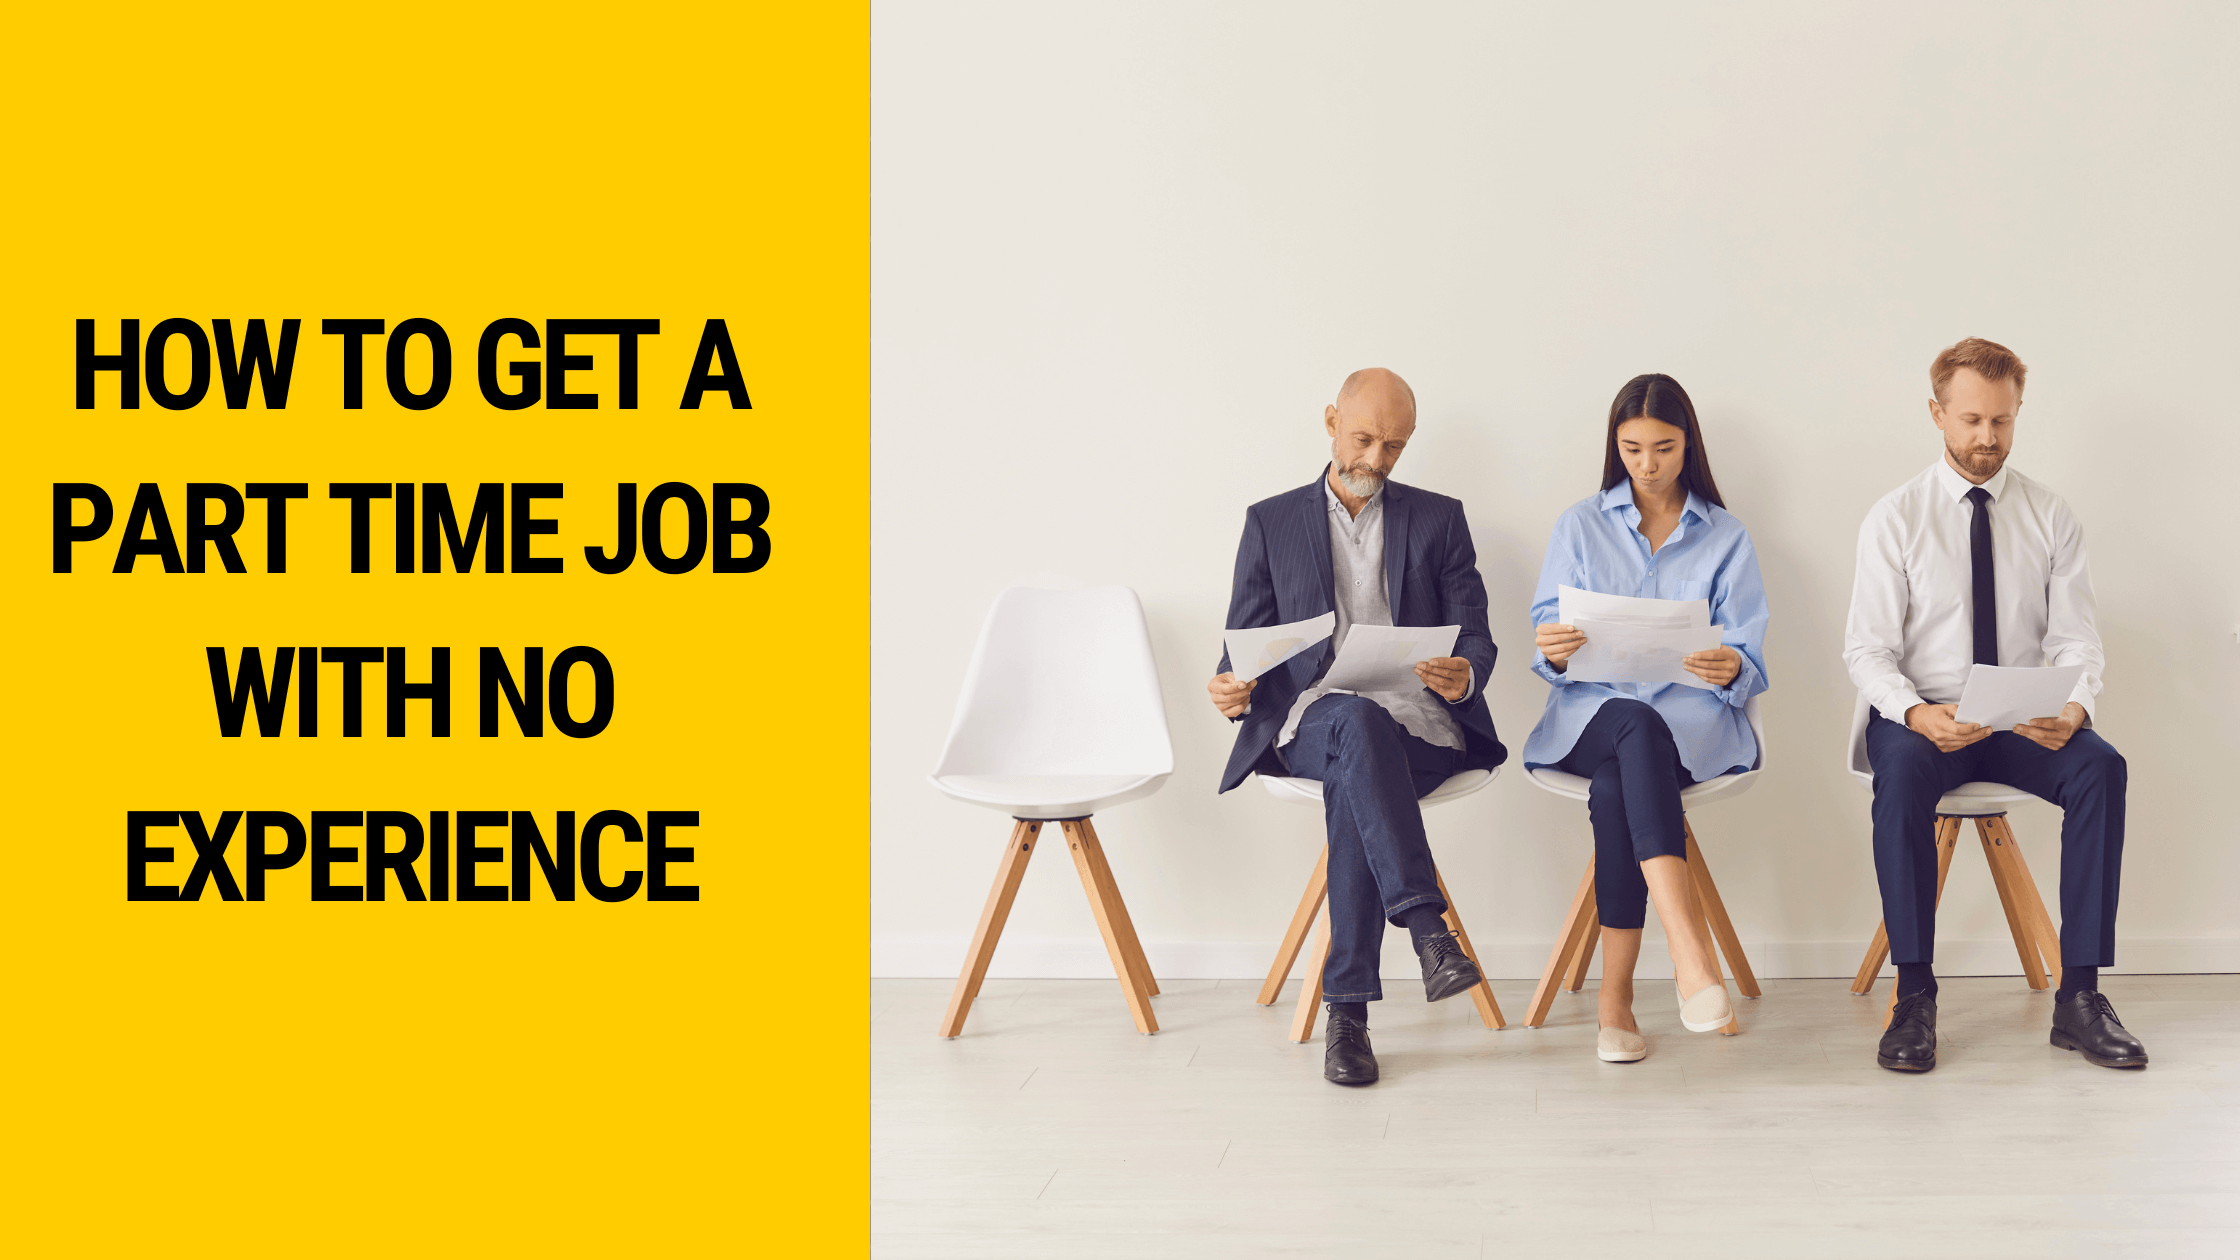 How to Get a Part Time Job With No Experience